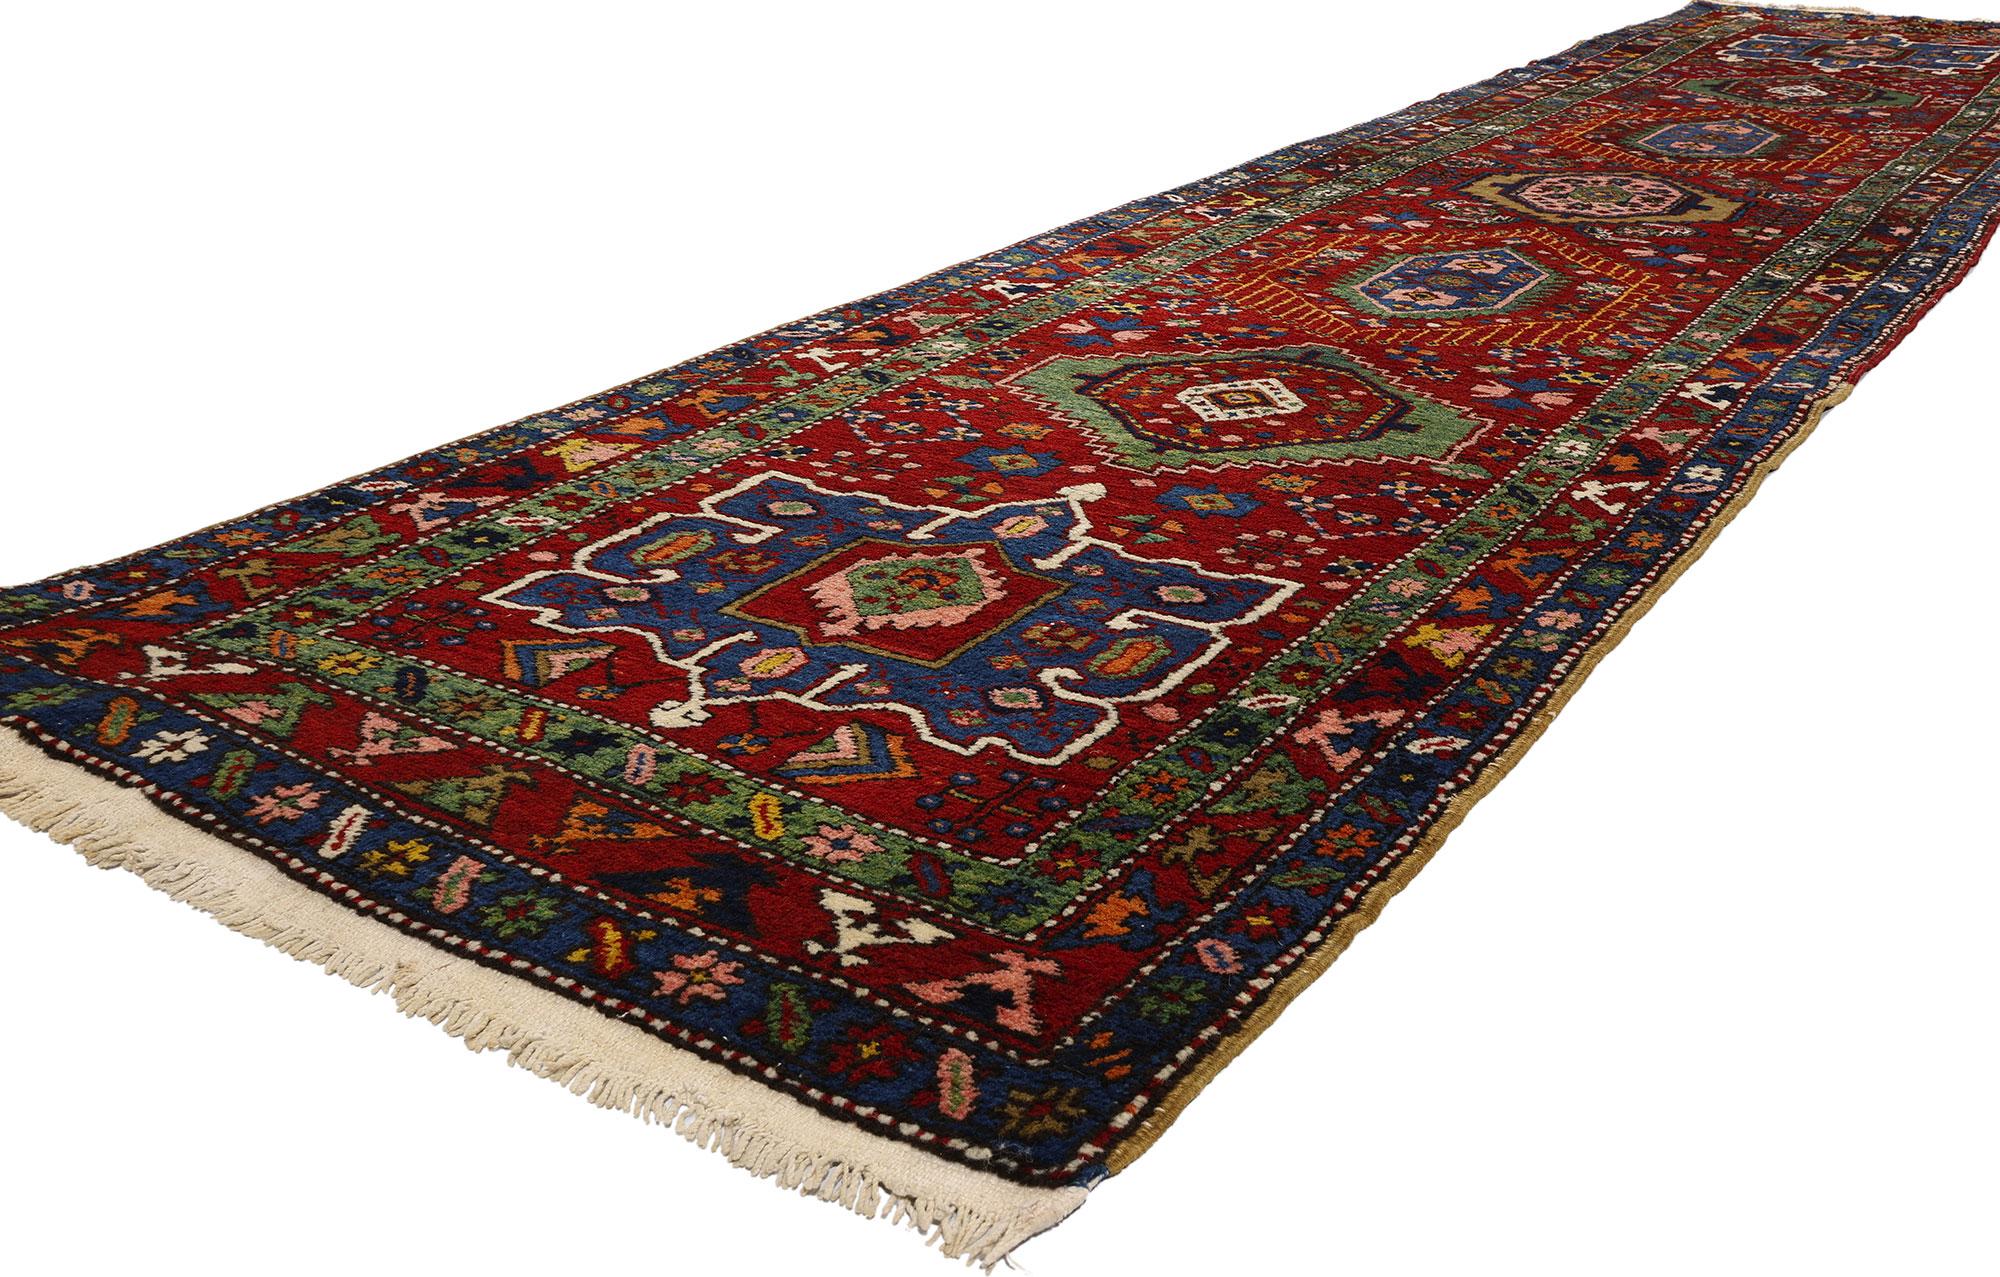 53872 Vintage Persian Karaja Heriz Rug Runner, 03'04 x 16'05. Persian Karaja Heriz rugs are meticulously crafted treasures that trace their roots to the Heriz region in Northwestern Iran, particularly the village of Karaja. Renowned for their